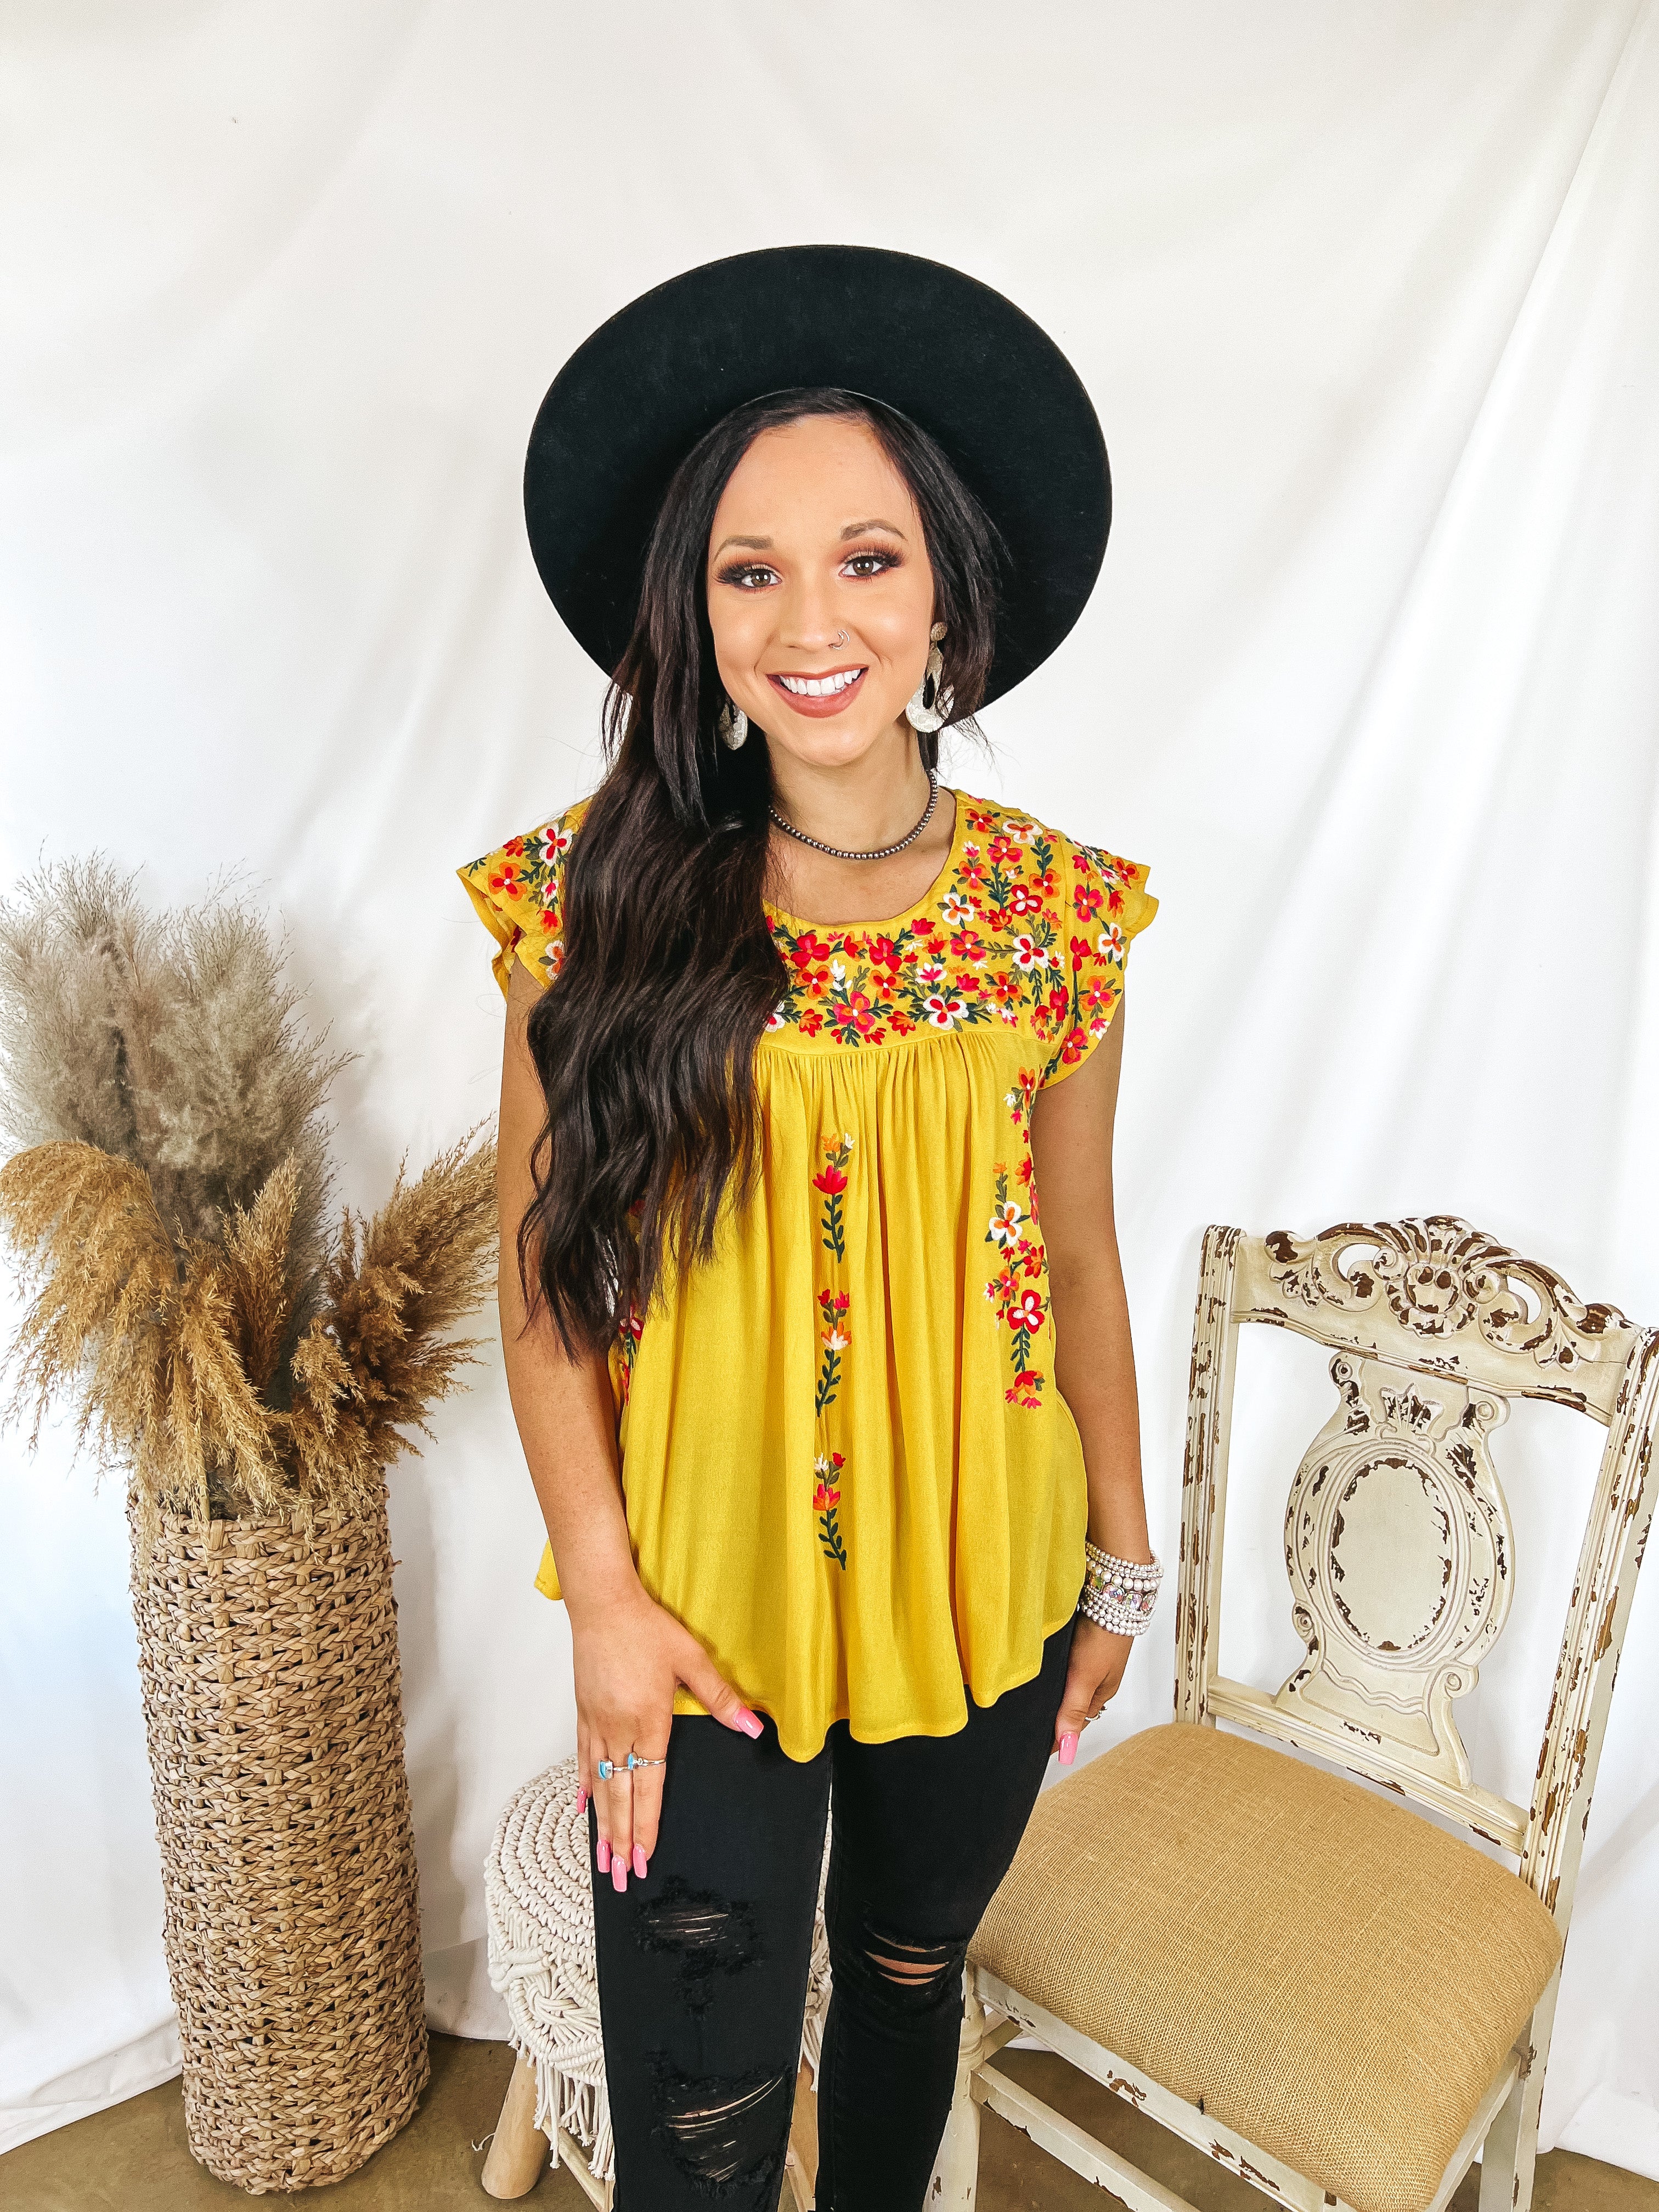 Lajitas Lady Floral Embroidered Babydoll Top in Yellow - Giddy Up Glamour Boutique